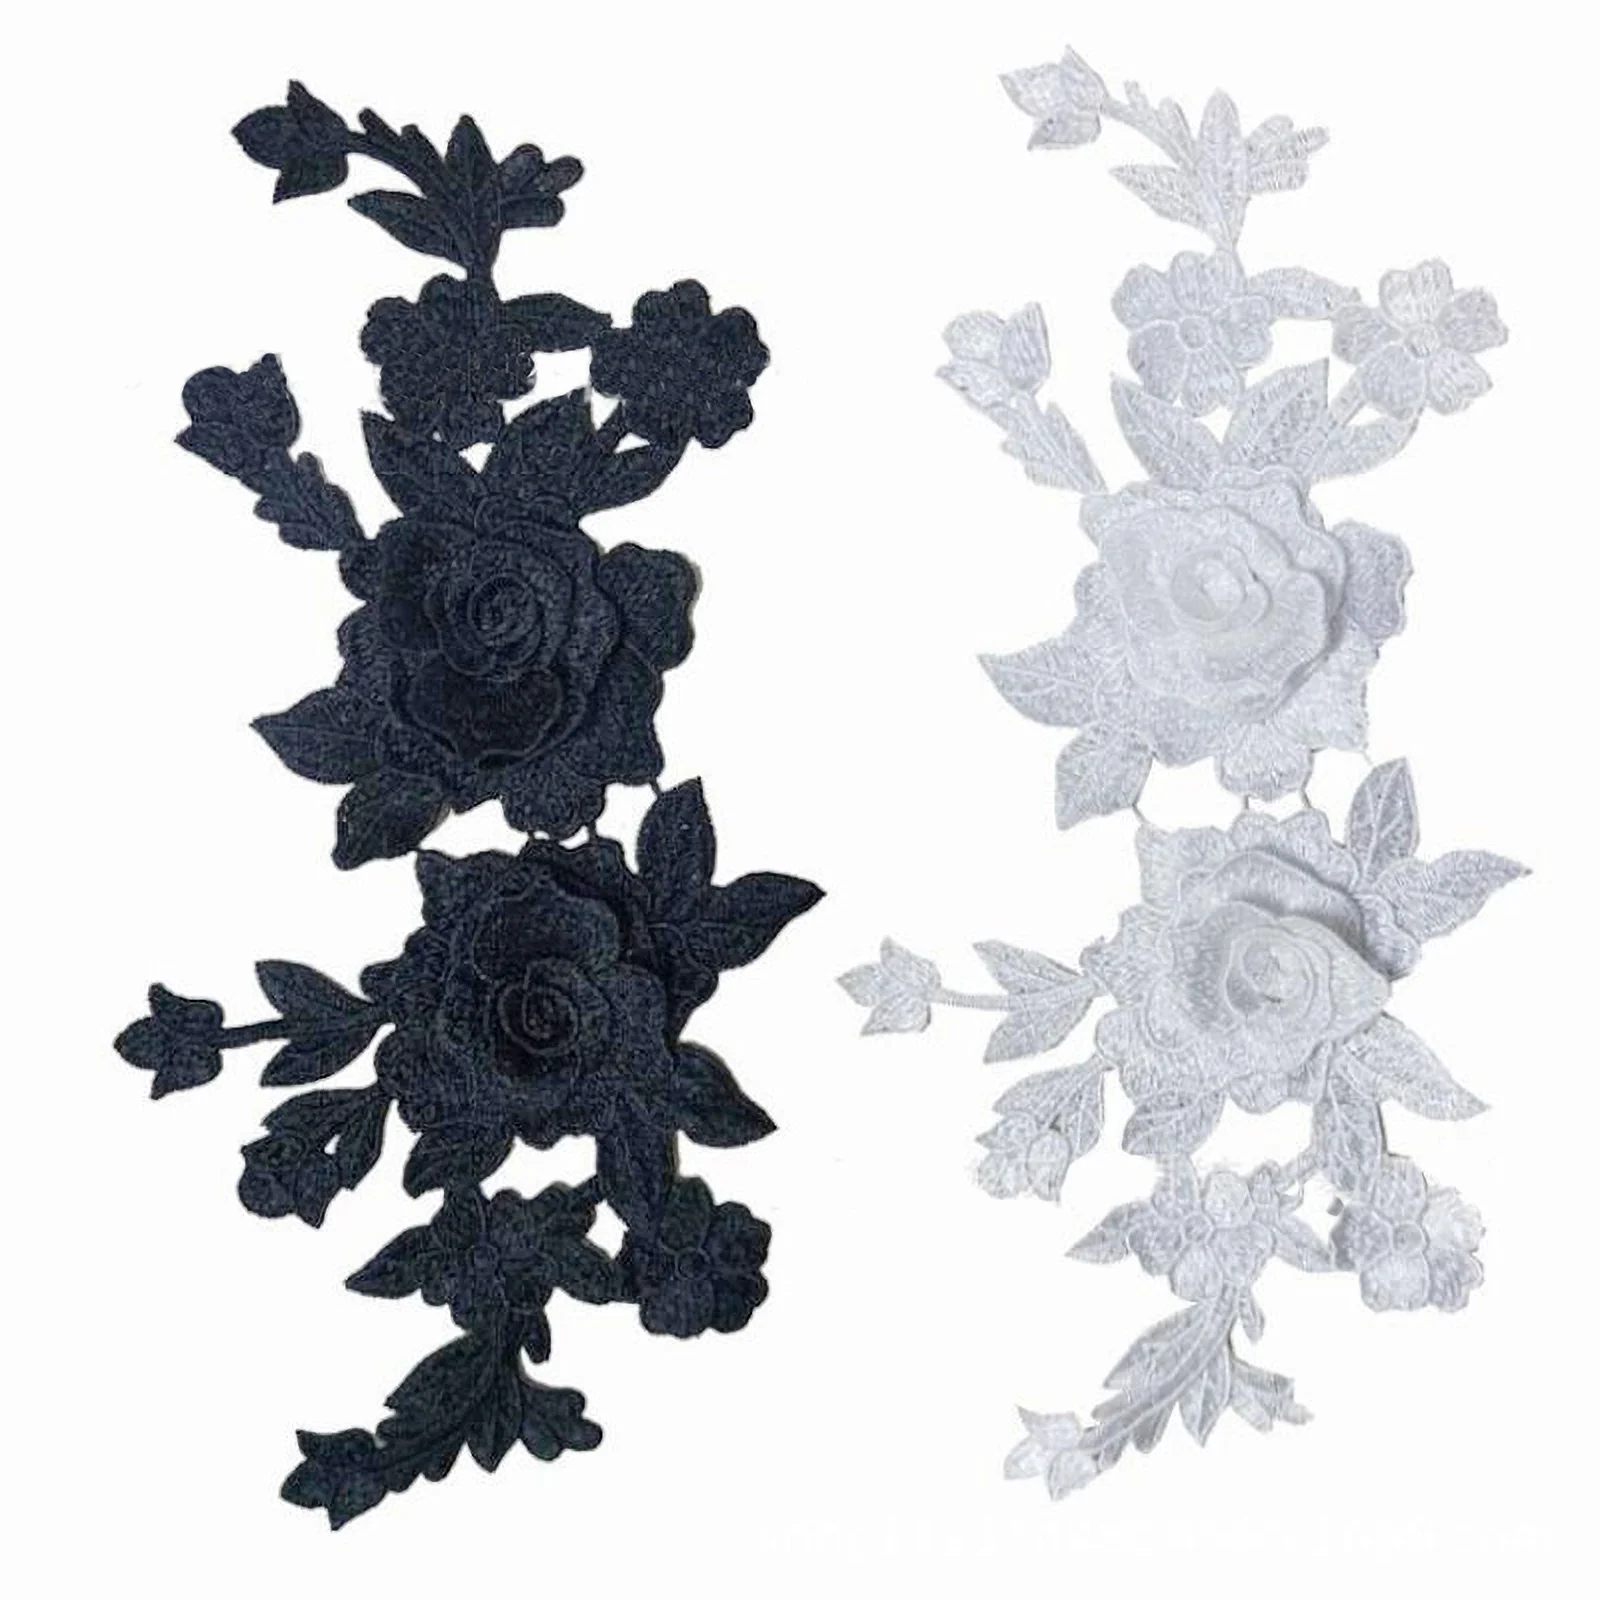 1 Pc Black White 3D Roses Flowers Embroidery Sew  On Patches Sewn Applique Embroidered DIY Clothes